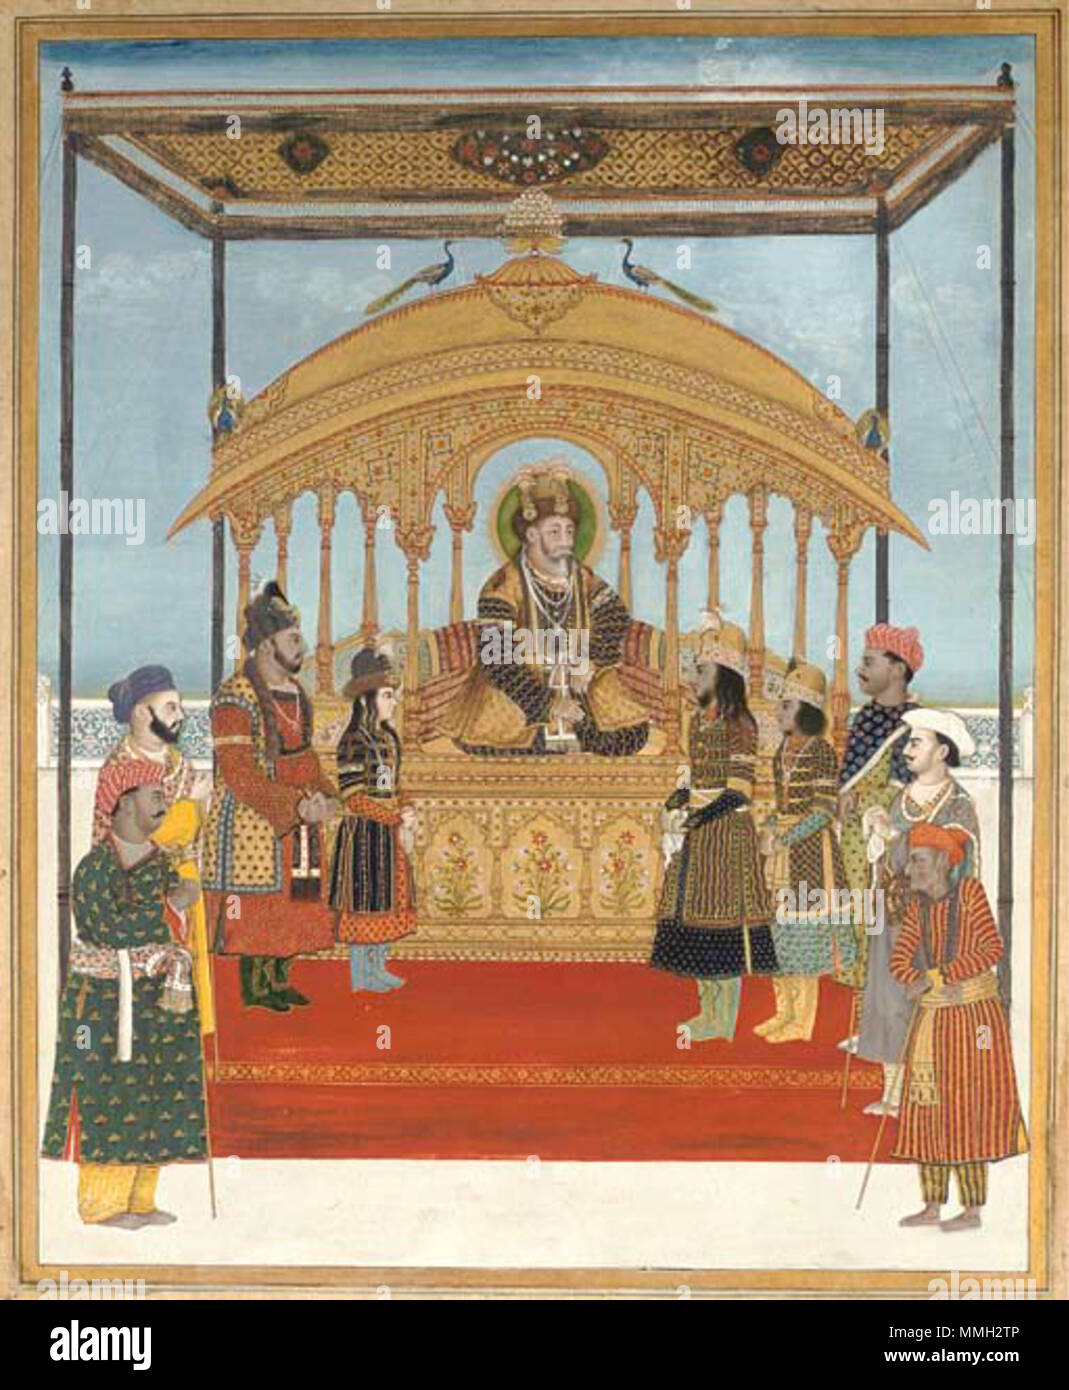 . English: The Delhi Darbar of Akbar Shah II. Gouache heightened with gold on paper, the nimbate Akbar II in embroidered gold coat sits enthroned, attended by his four sons and four emissaries, all in various brightly coloured garments, some wearing jewelled and stippled gold headresses and finely decorated boots, with a striking background drawn in perspective of a red sandstone hypostyle with opening onto spacious palace courtyard beyond, mounted on card with thin gold, black and orange border, in modern mount, slight flaking around edges, otherwise in very good condition. Miniature 12 x 16i Stock Photo